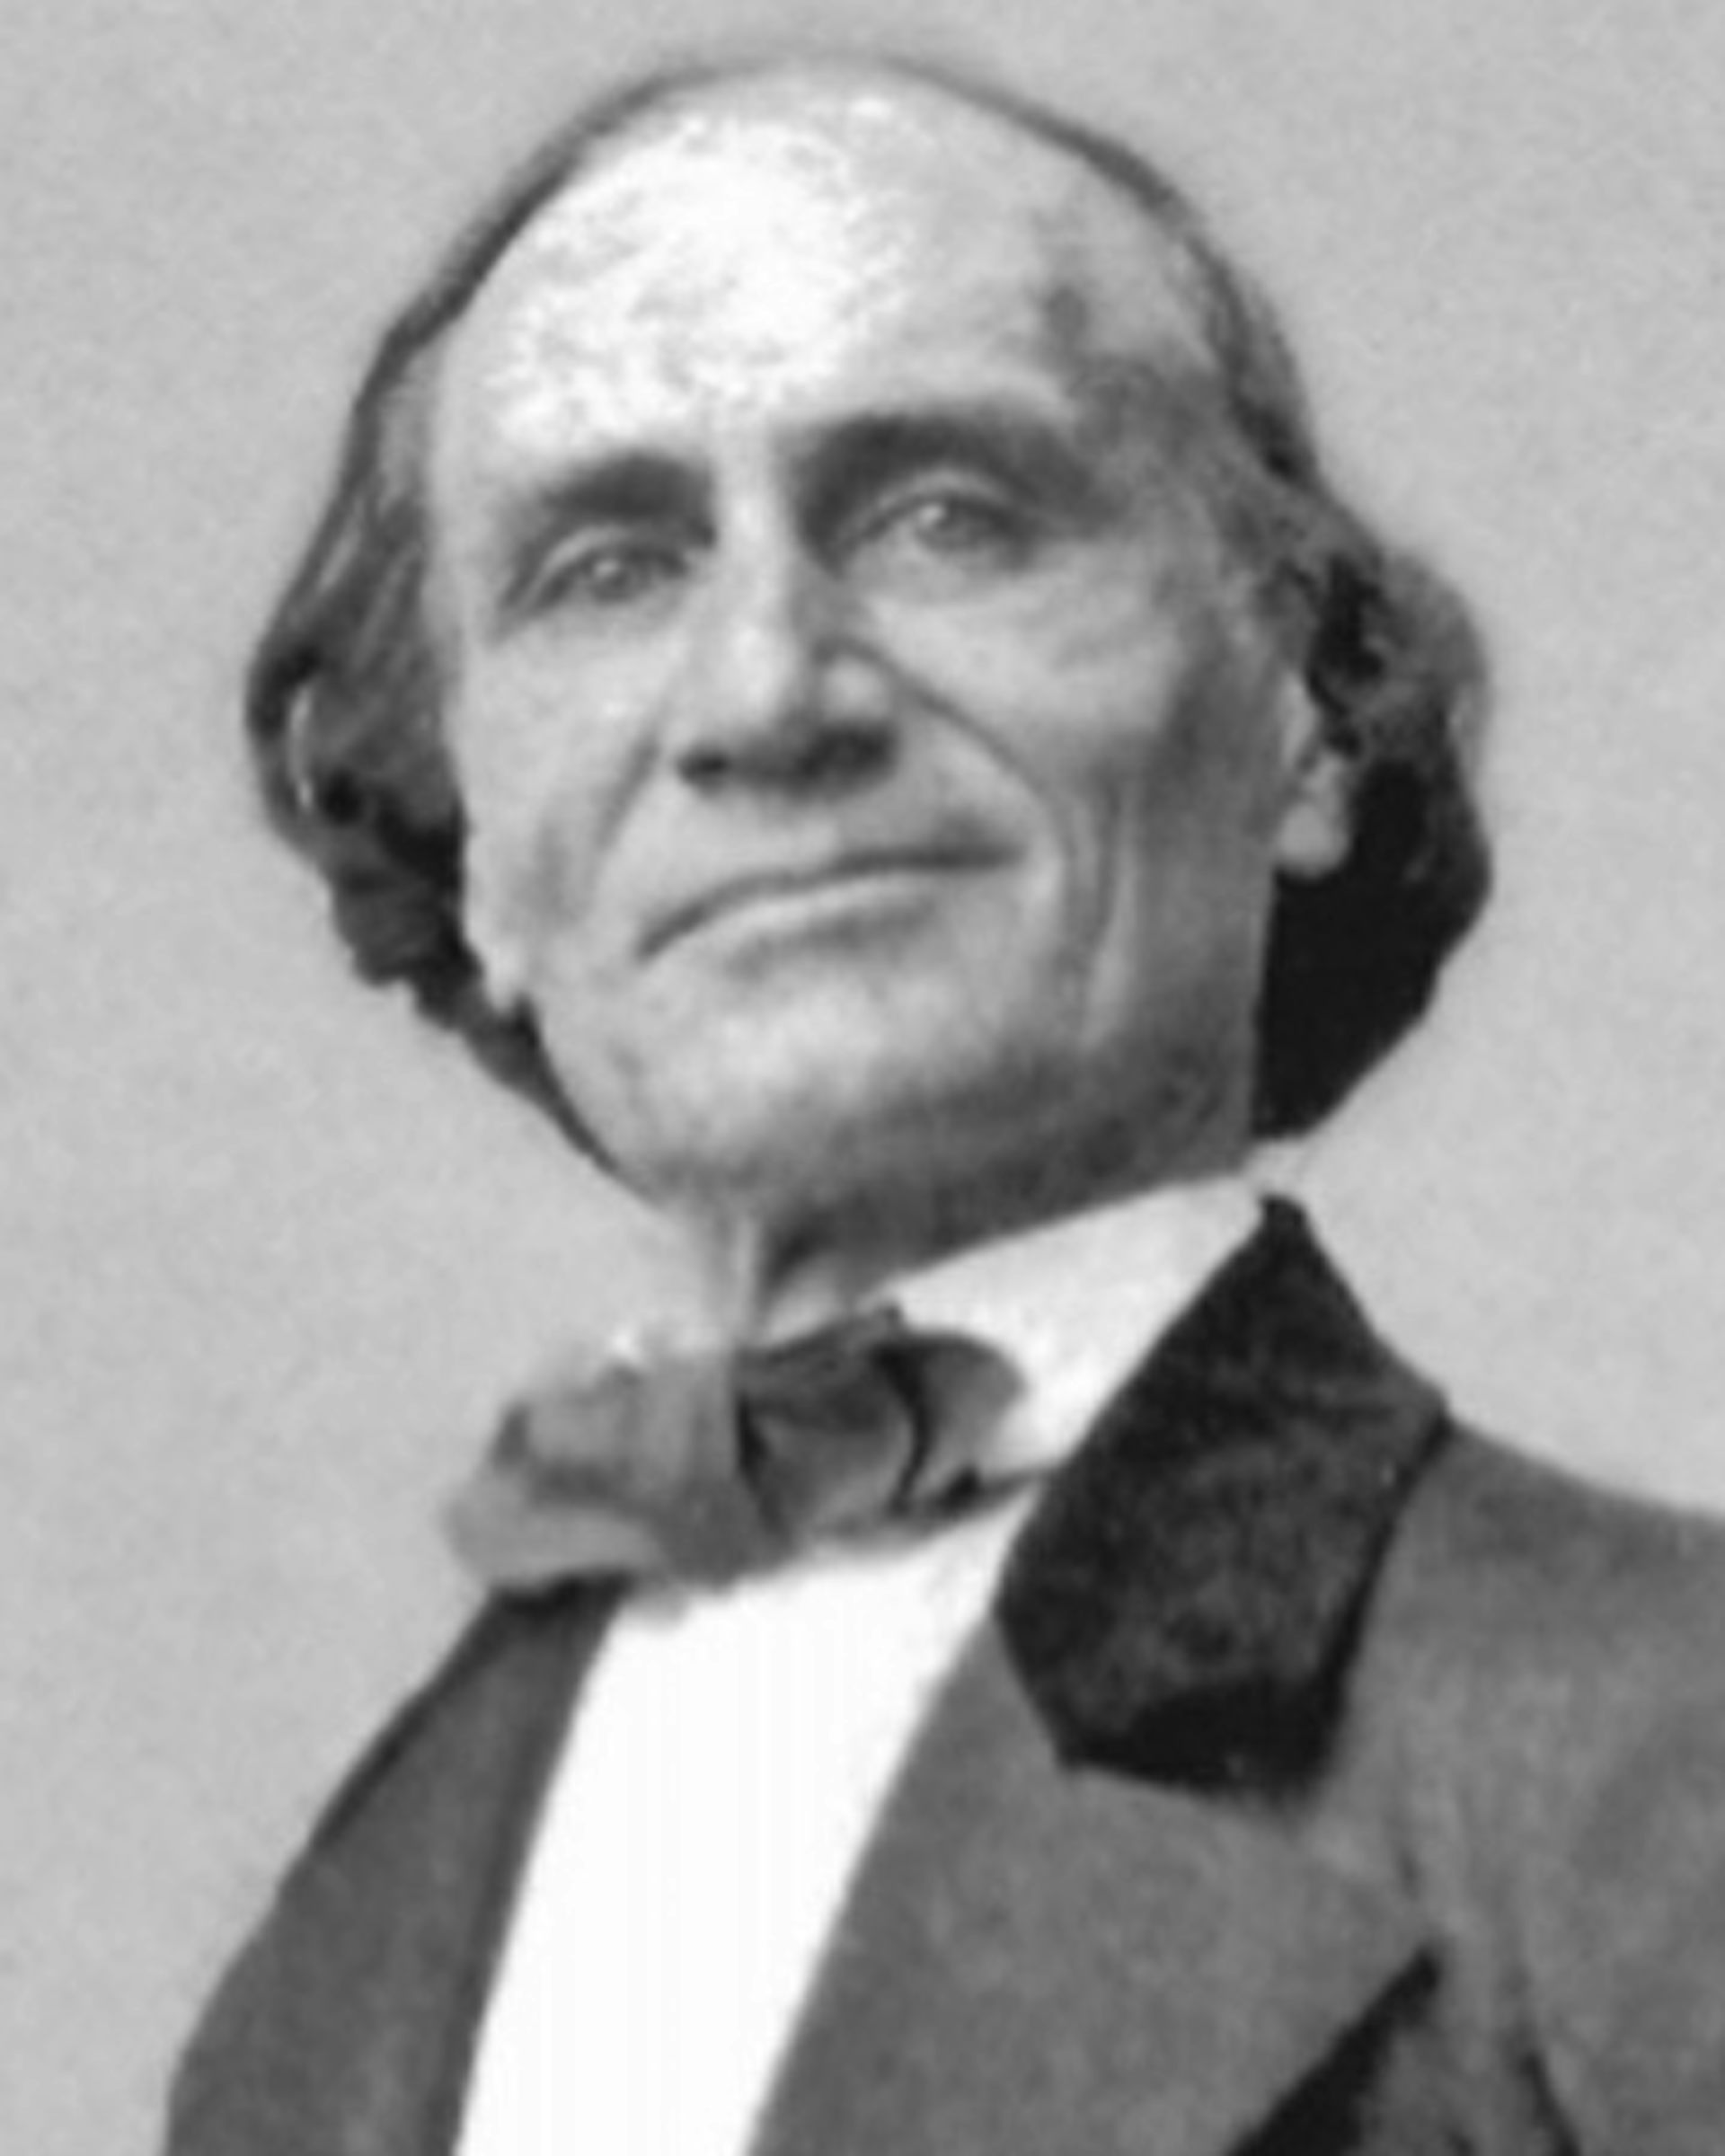 A black and white portrait of a man.